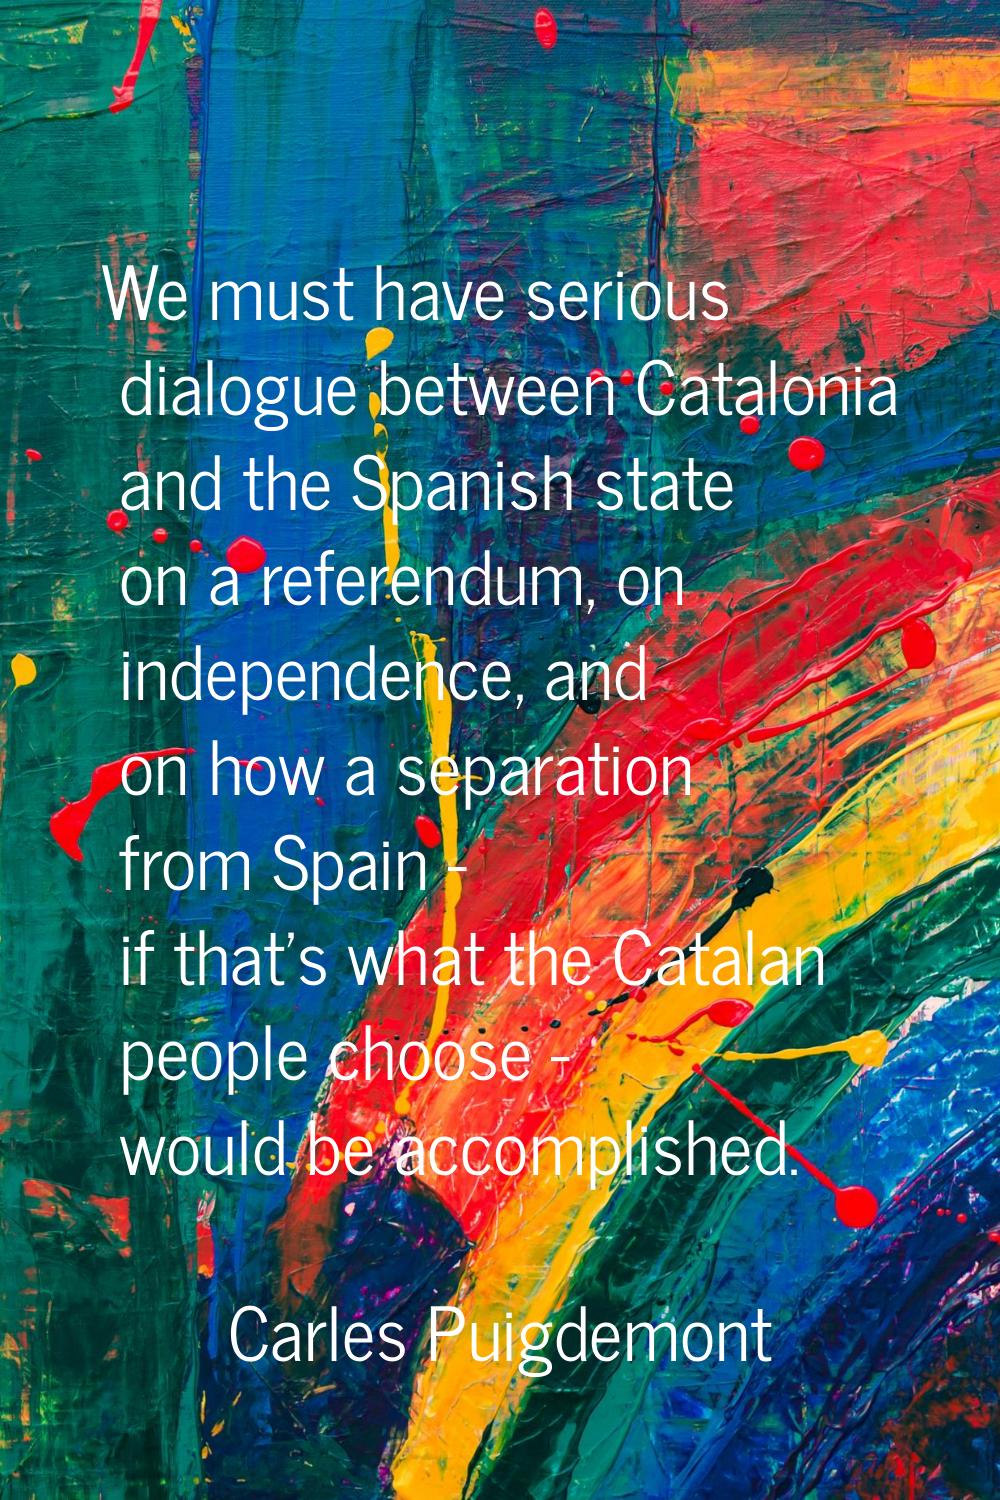 We must have serious dialogue between Catalonia and the Spanish state on a referendum, on independe